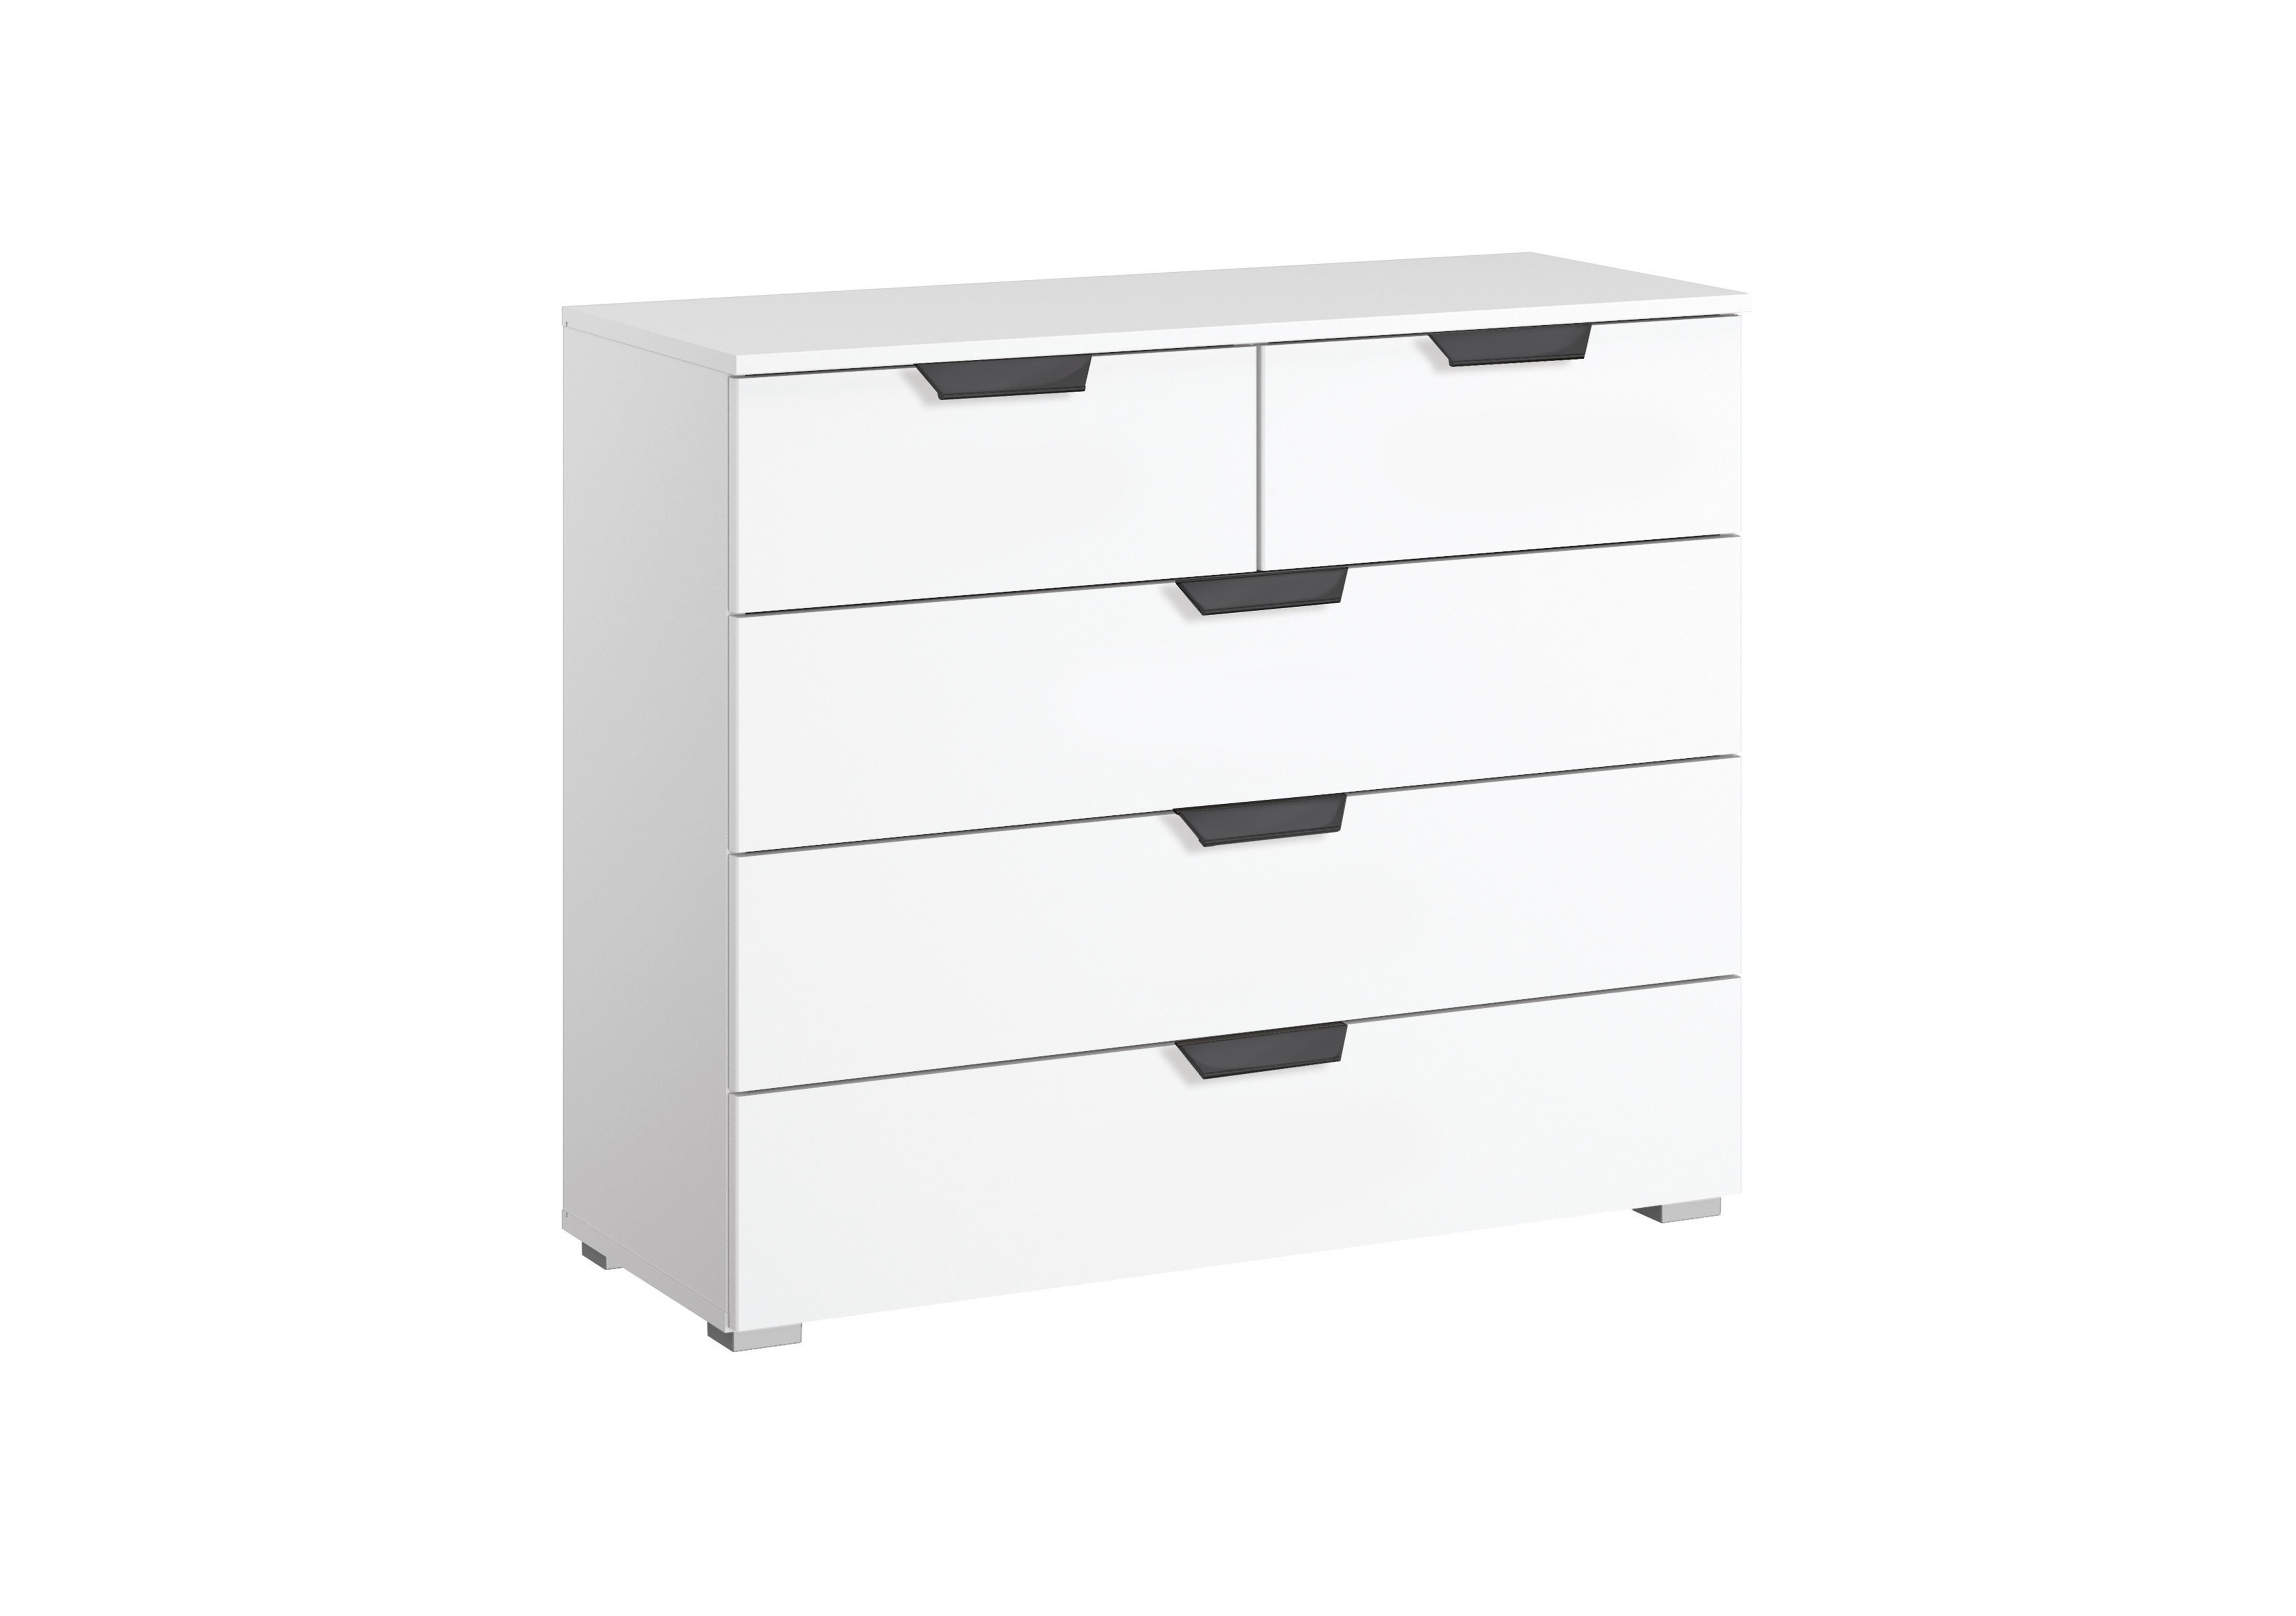 Lima 2+3 Drawer Chest with Decor Front in A970w Alp Wht/Alp Wht on Furniture Village